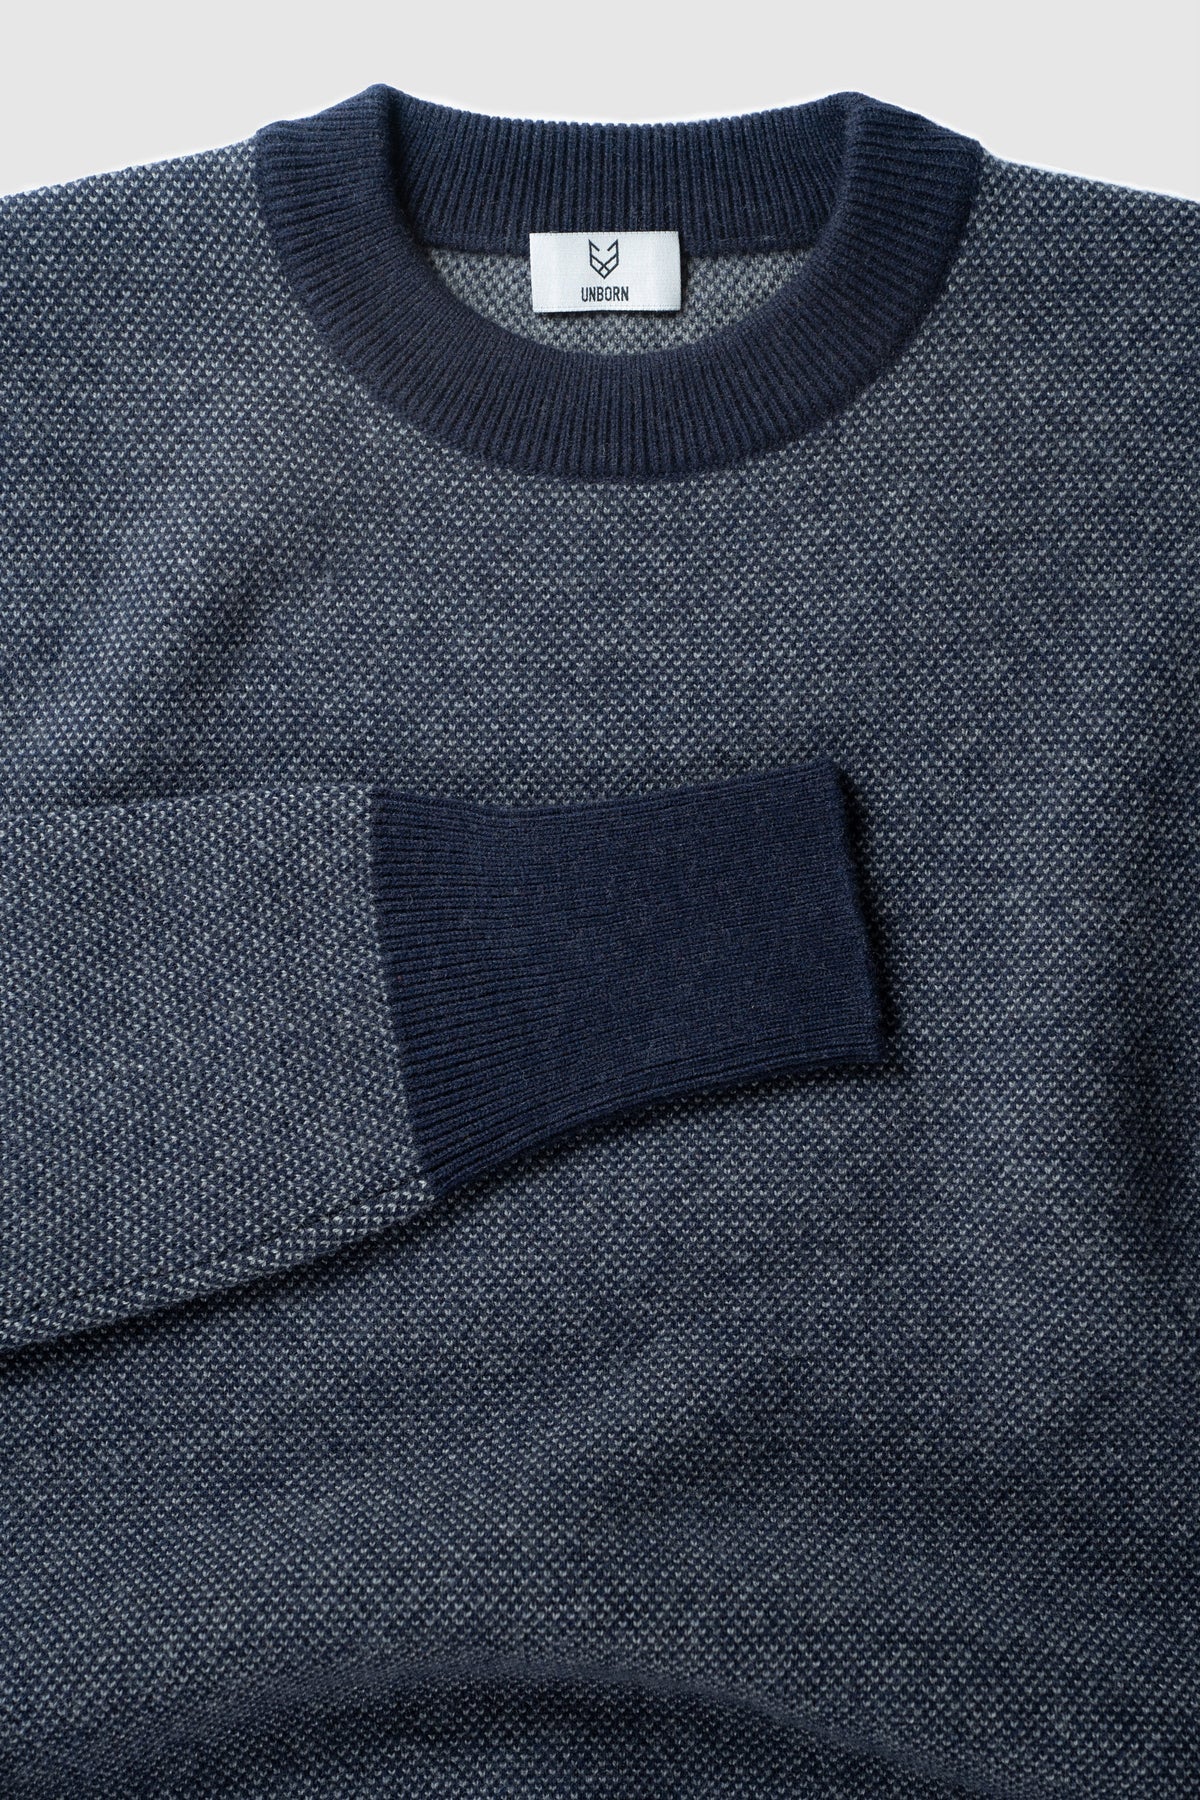 The Merino wool jaquard sweater Navy Grey, close up flat front - Unborn